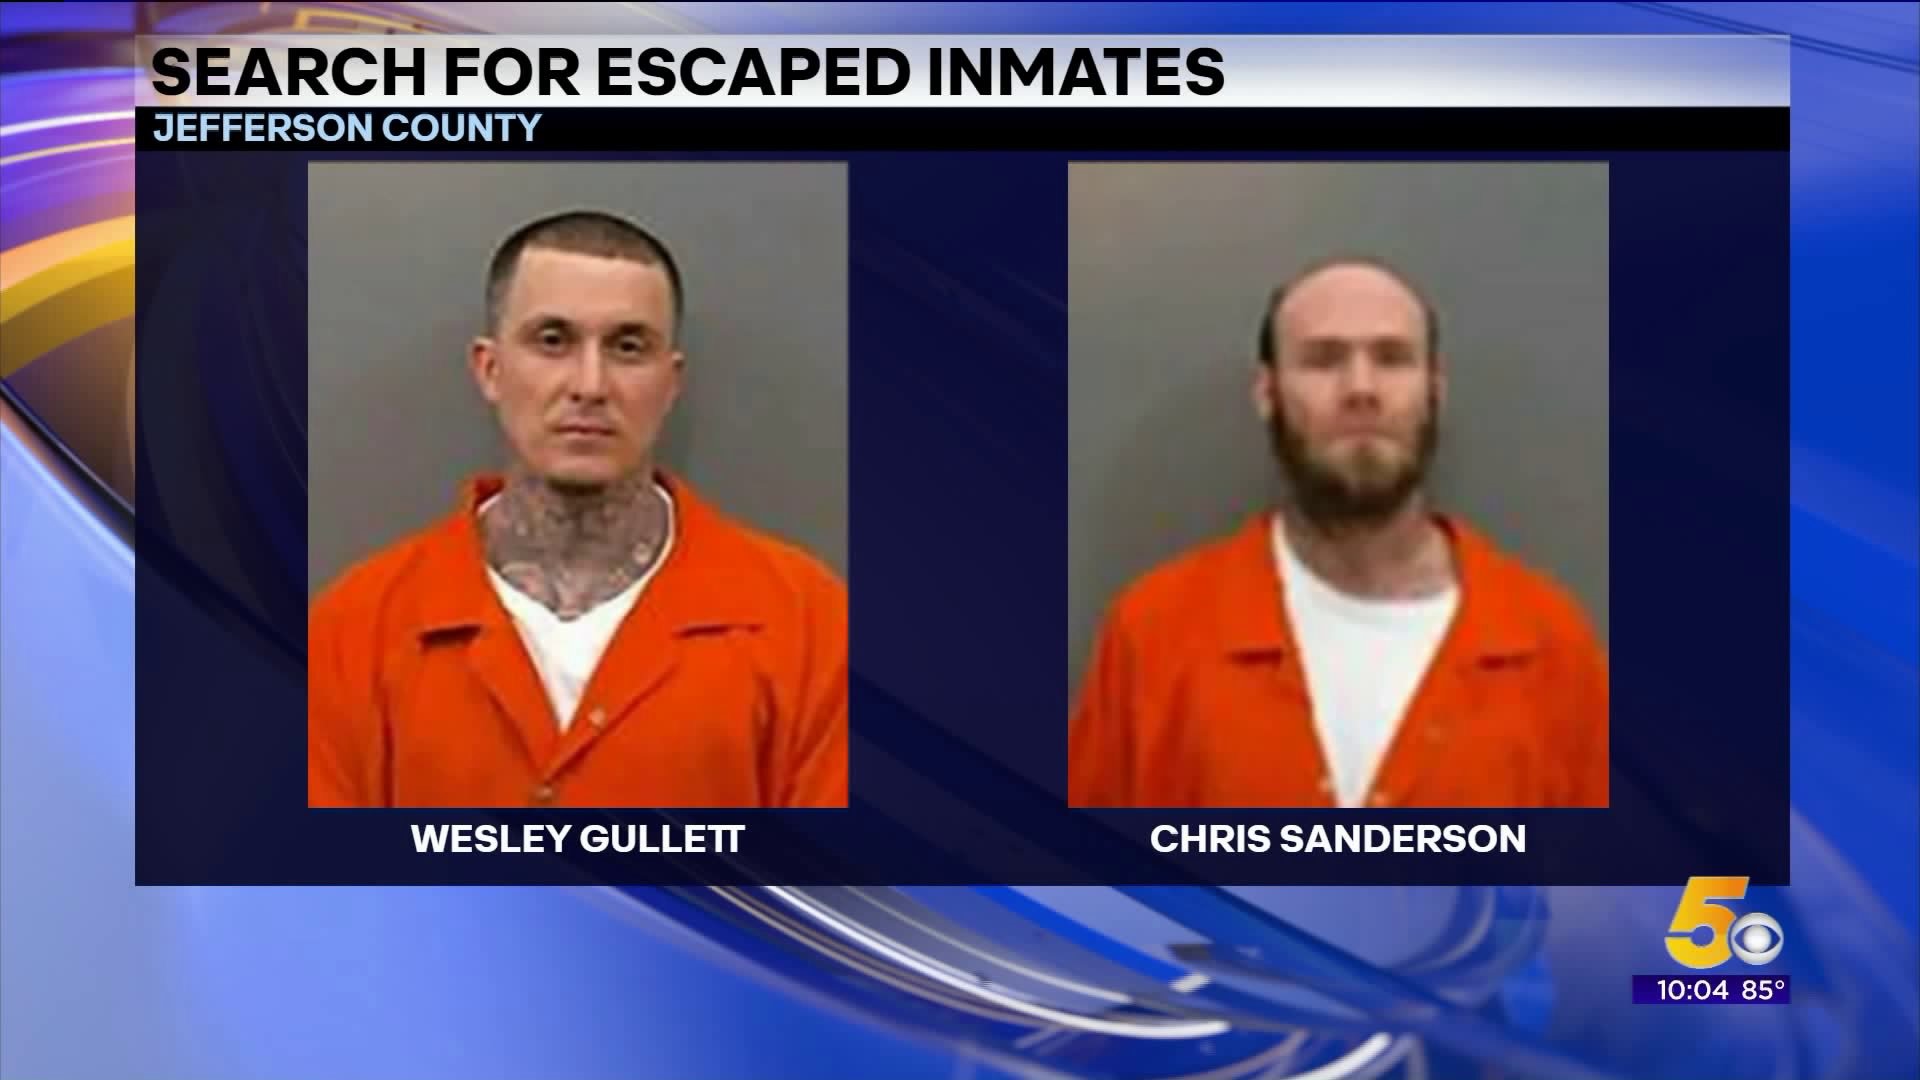 Search for Escaped Inmates